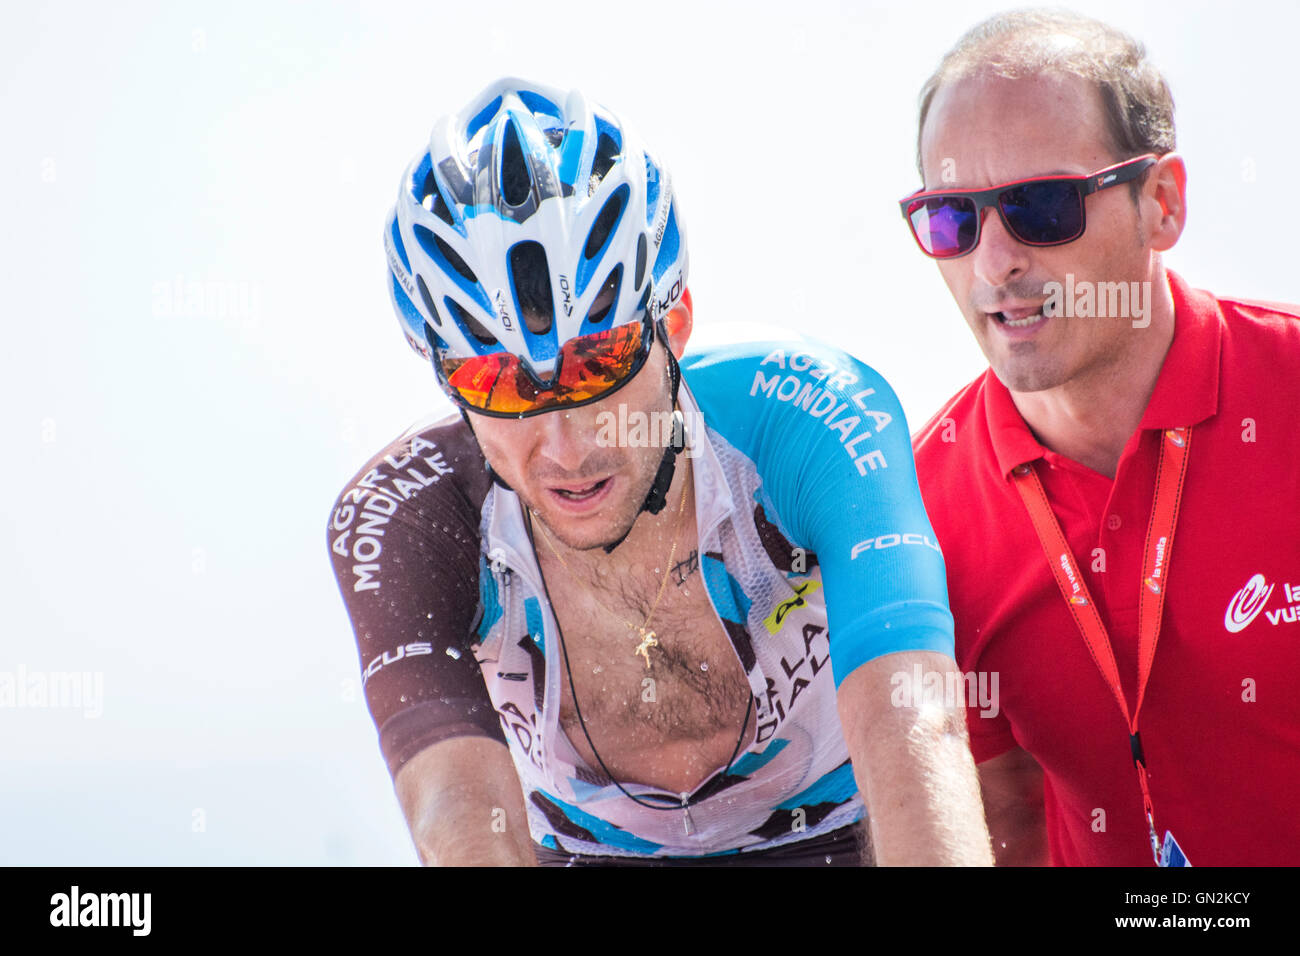 La Camperona, Spain. 27th August, 2016. Pierre Latour (AG2R La Mondiale) finishes the 8th stage of cycling race ‘La Vuelta a España’ (Tour of Spain) between Villalpando and Climb of La Camperona on August 27, 2016 in Leon, Spain. Credit: David Gato/Alamy Live News Stock Photo